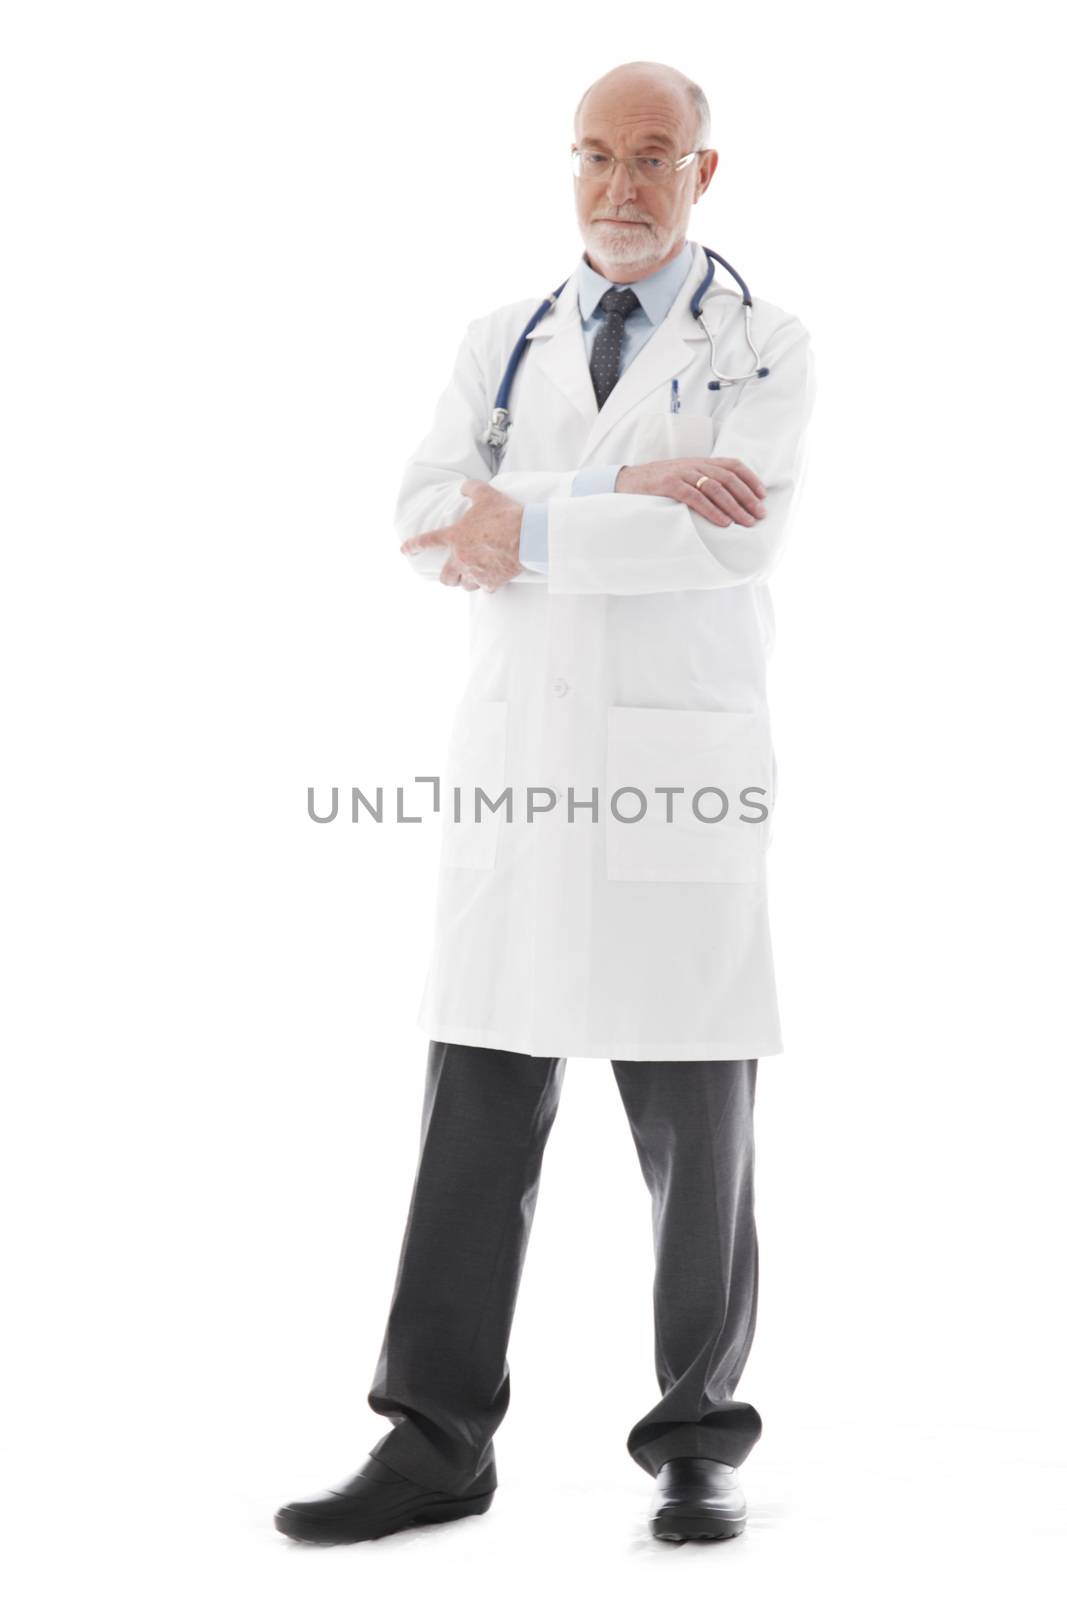 Mature doctor by ALotOfPeople